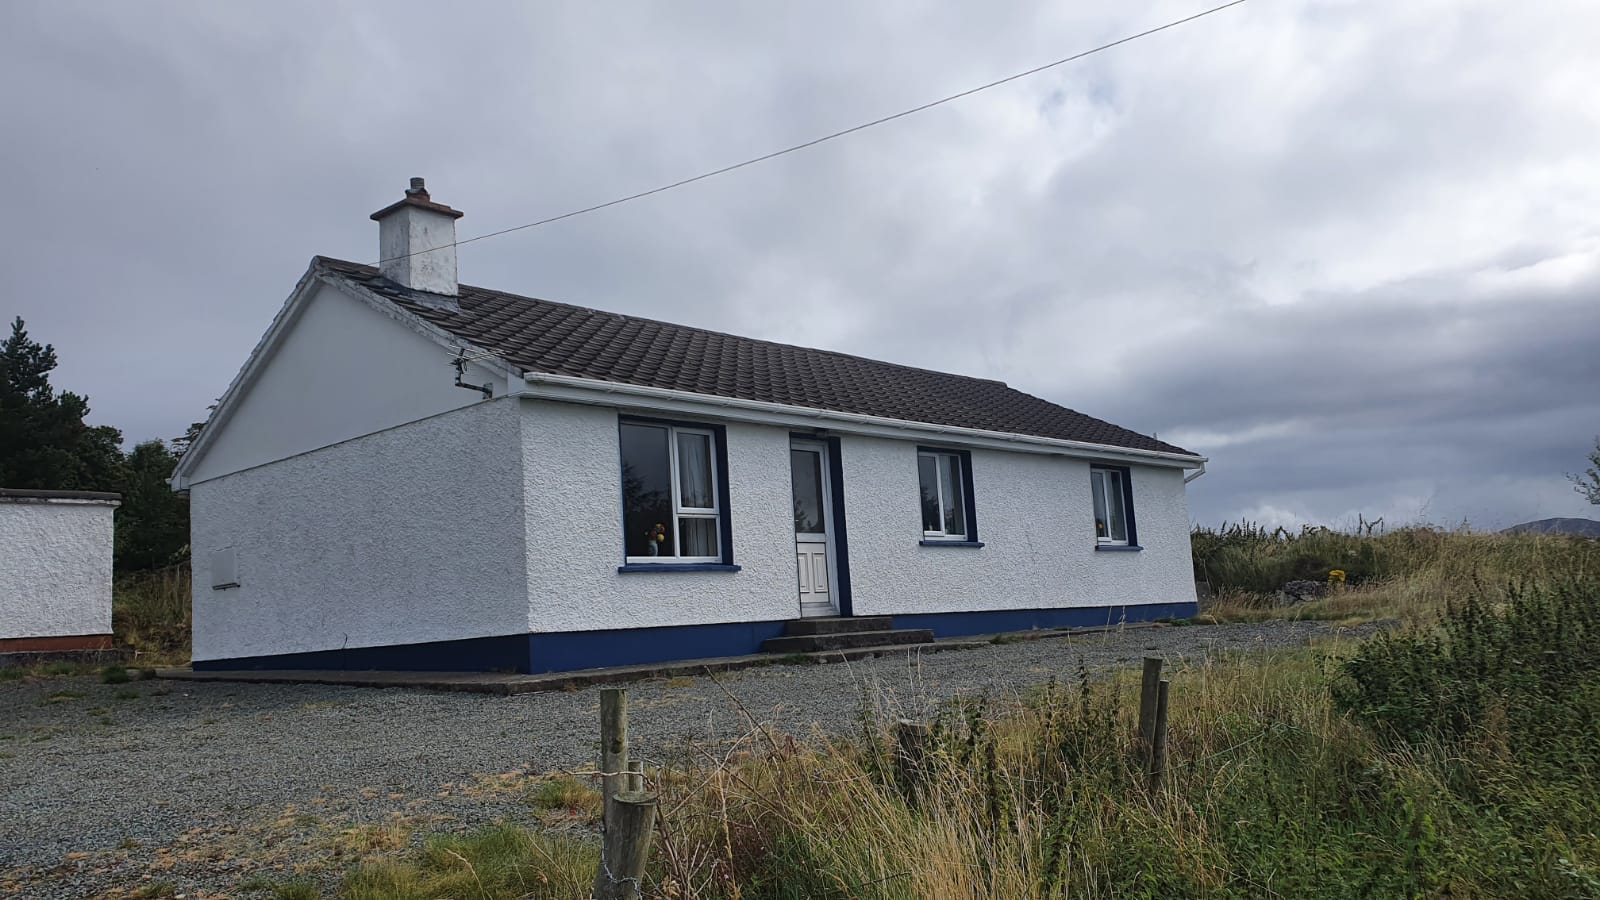 3 Bedroom House for Rent in Cloghbolie, Lettermacaward.